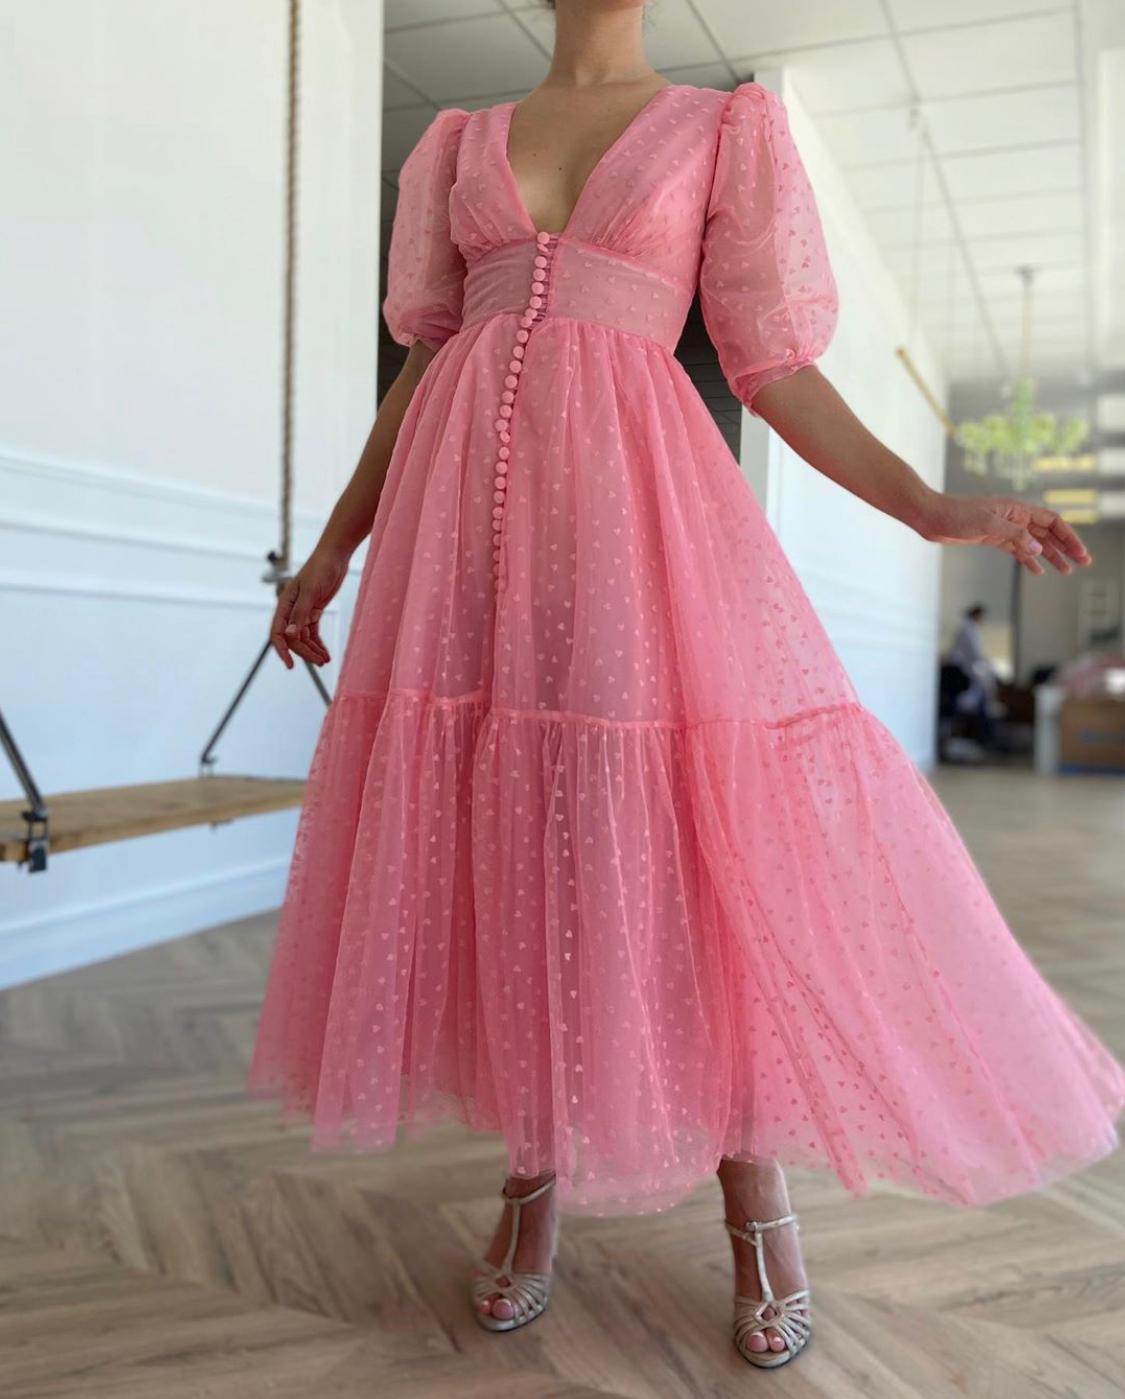 Pink midi dress with short sleeves, v-neck and hearty fabric